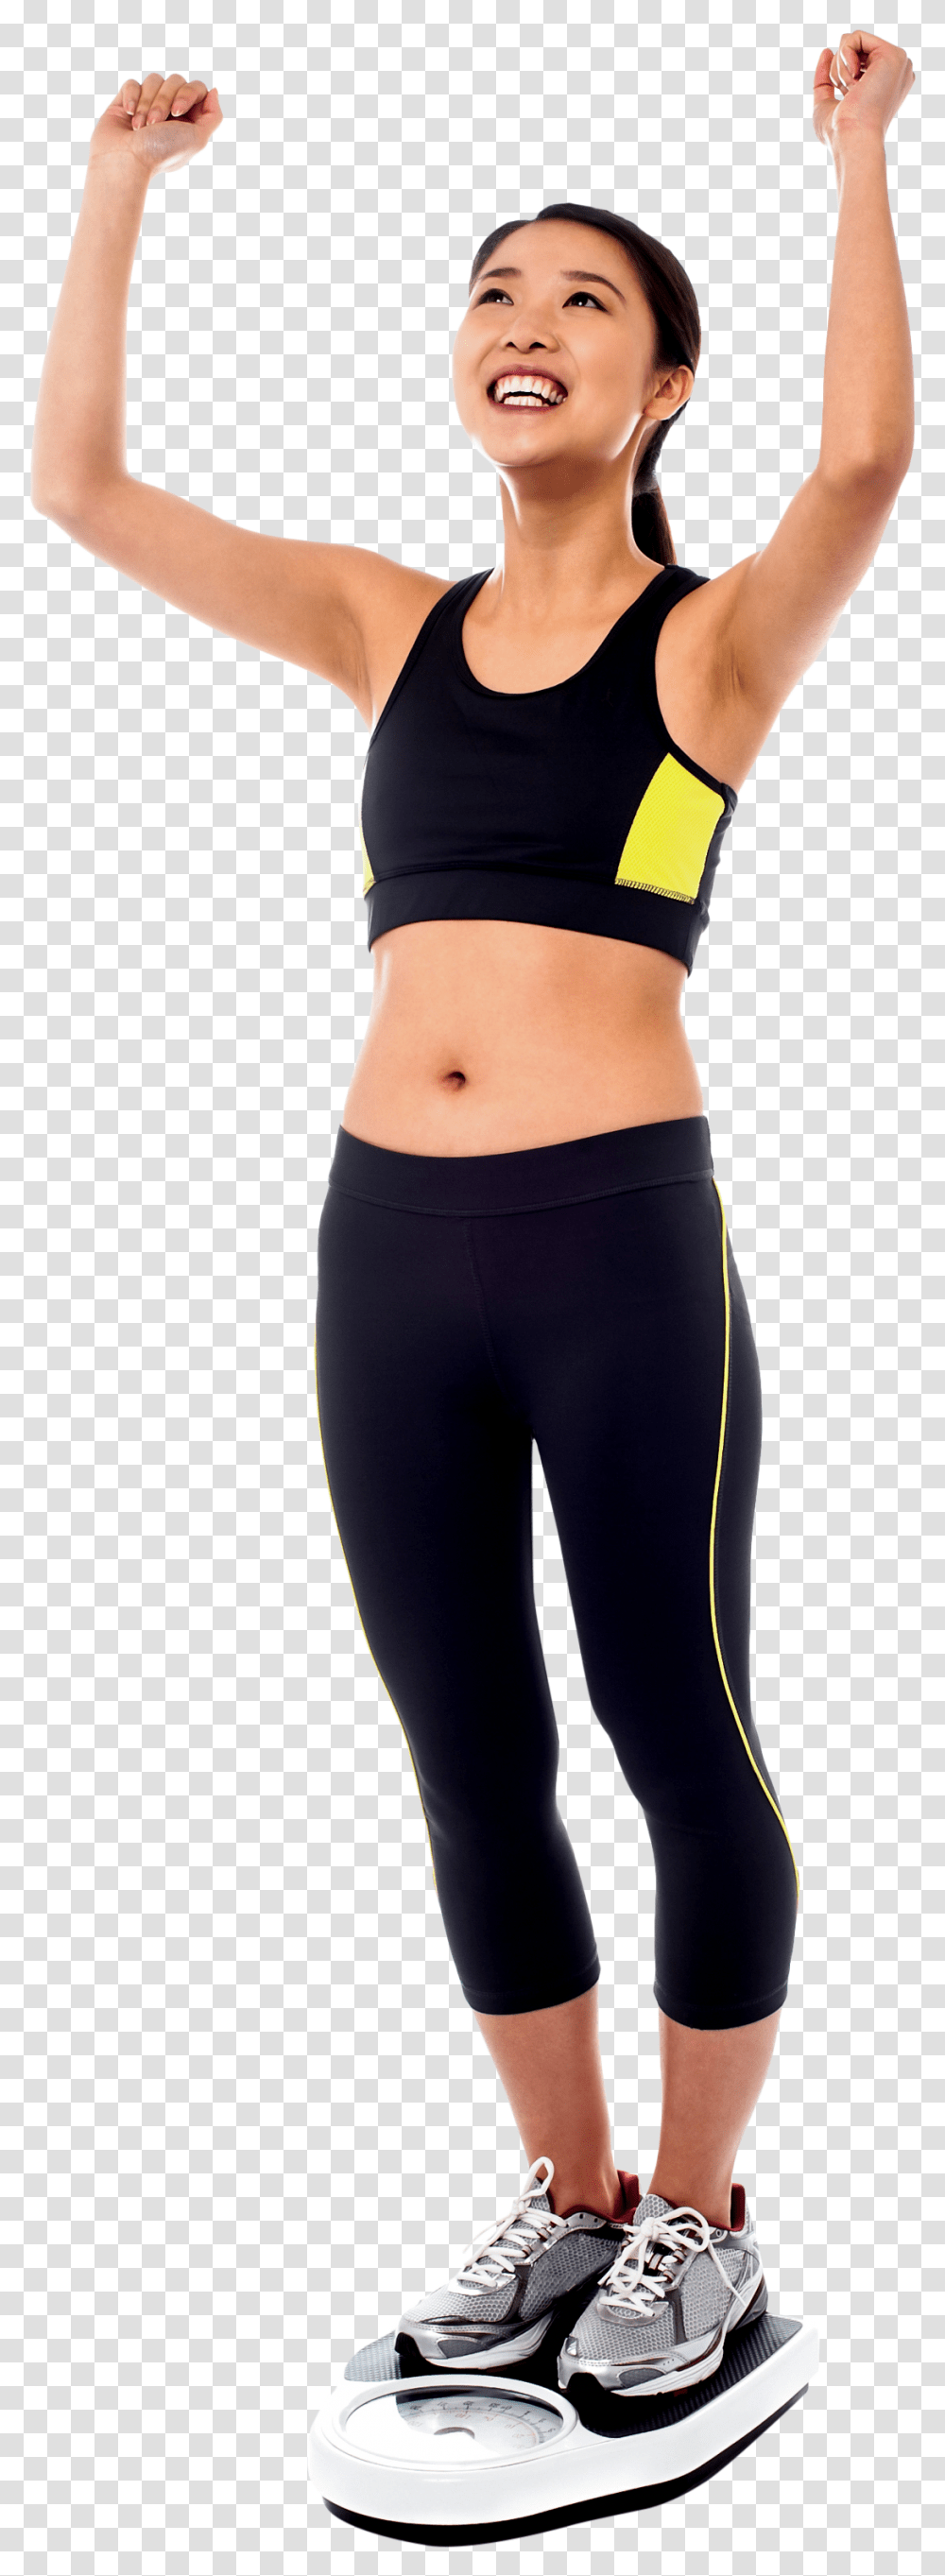 Download Happy Women Image For Free Weight Loss Free, Person, Human, Spandex, Clothing Transparent Png